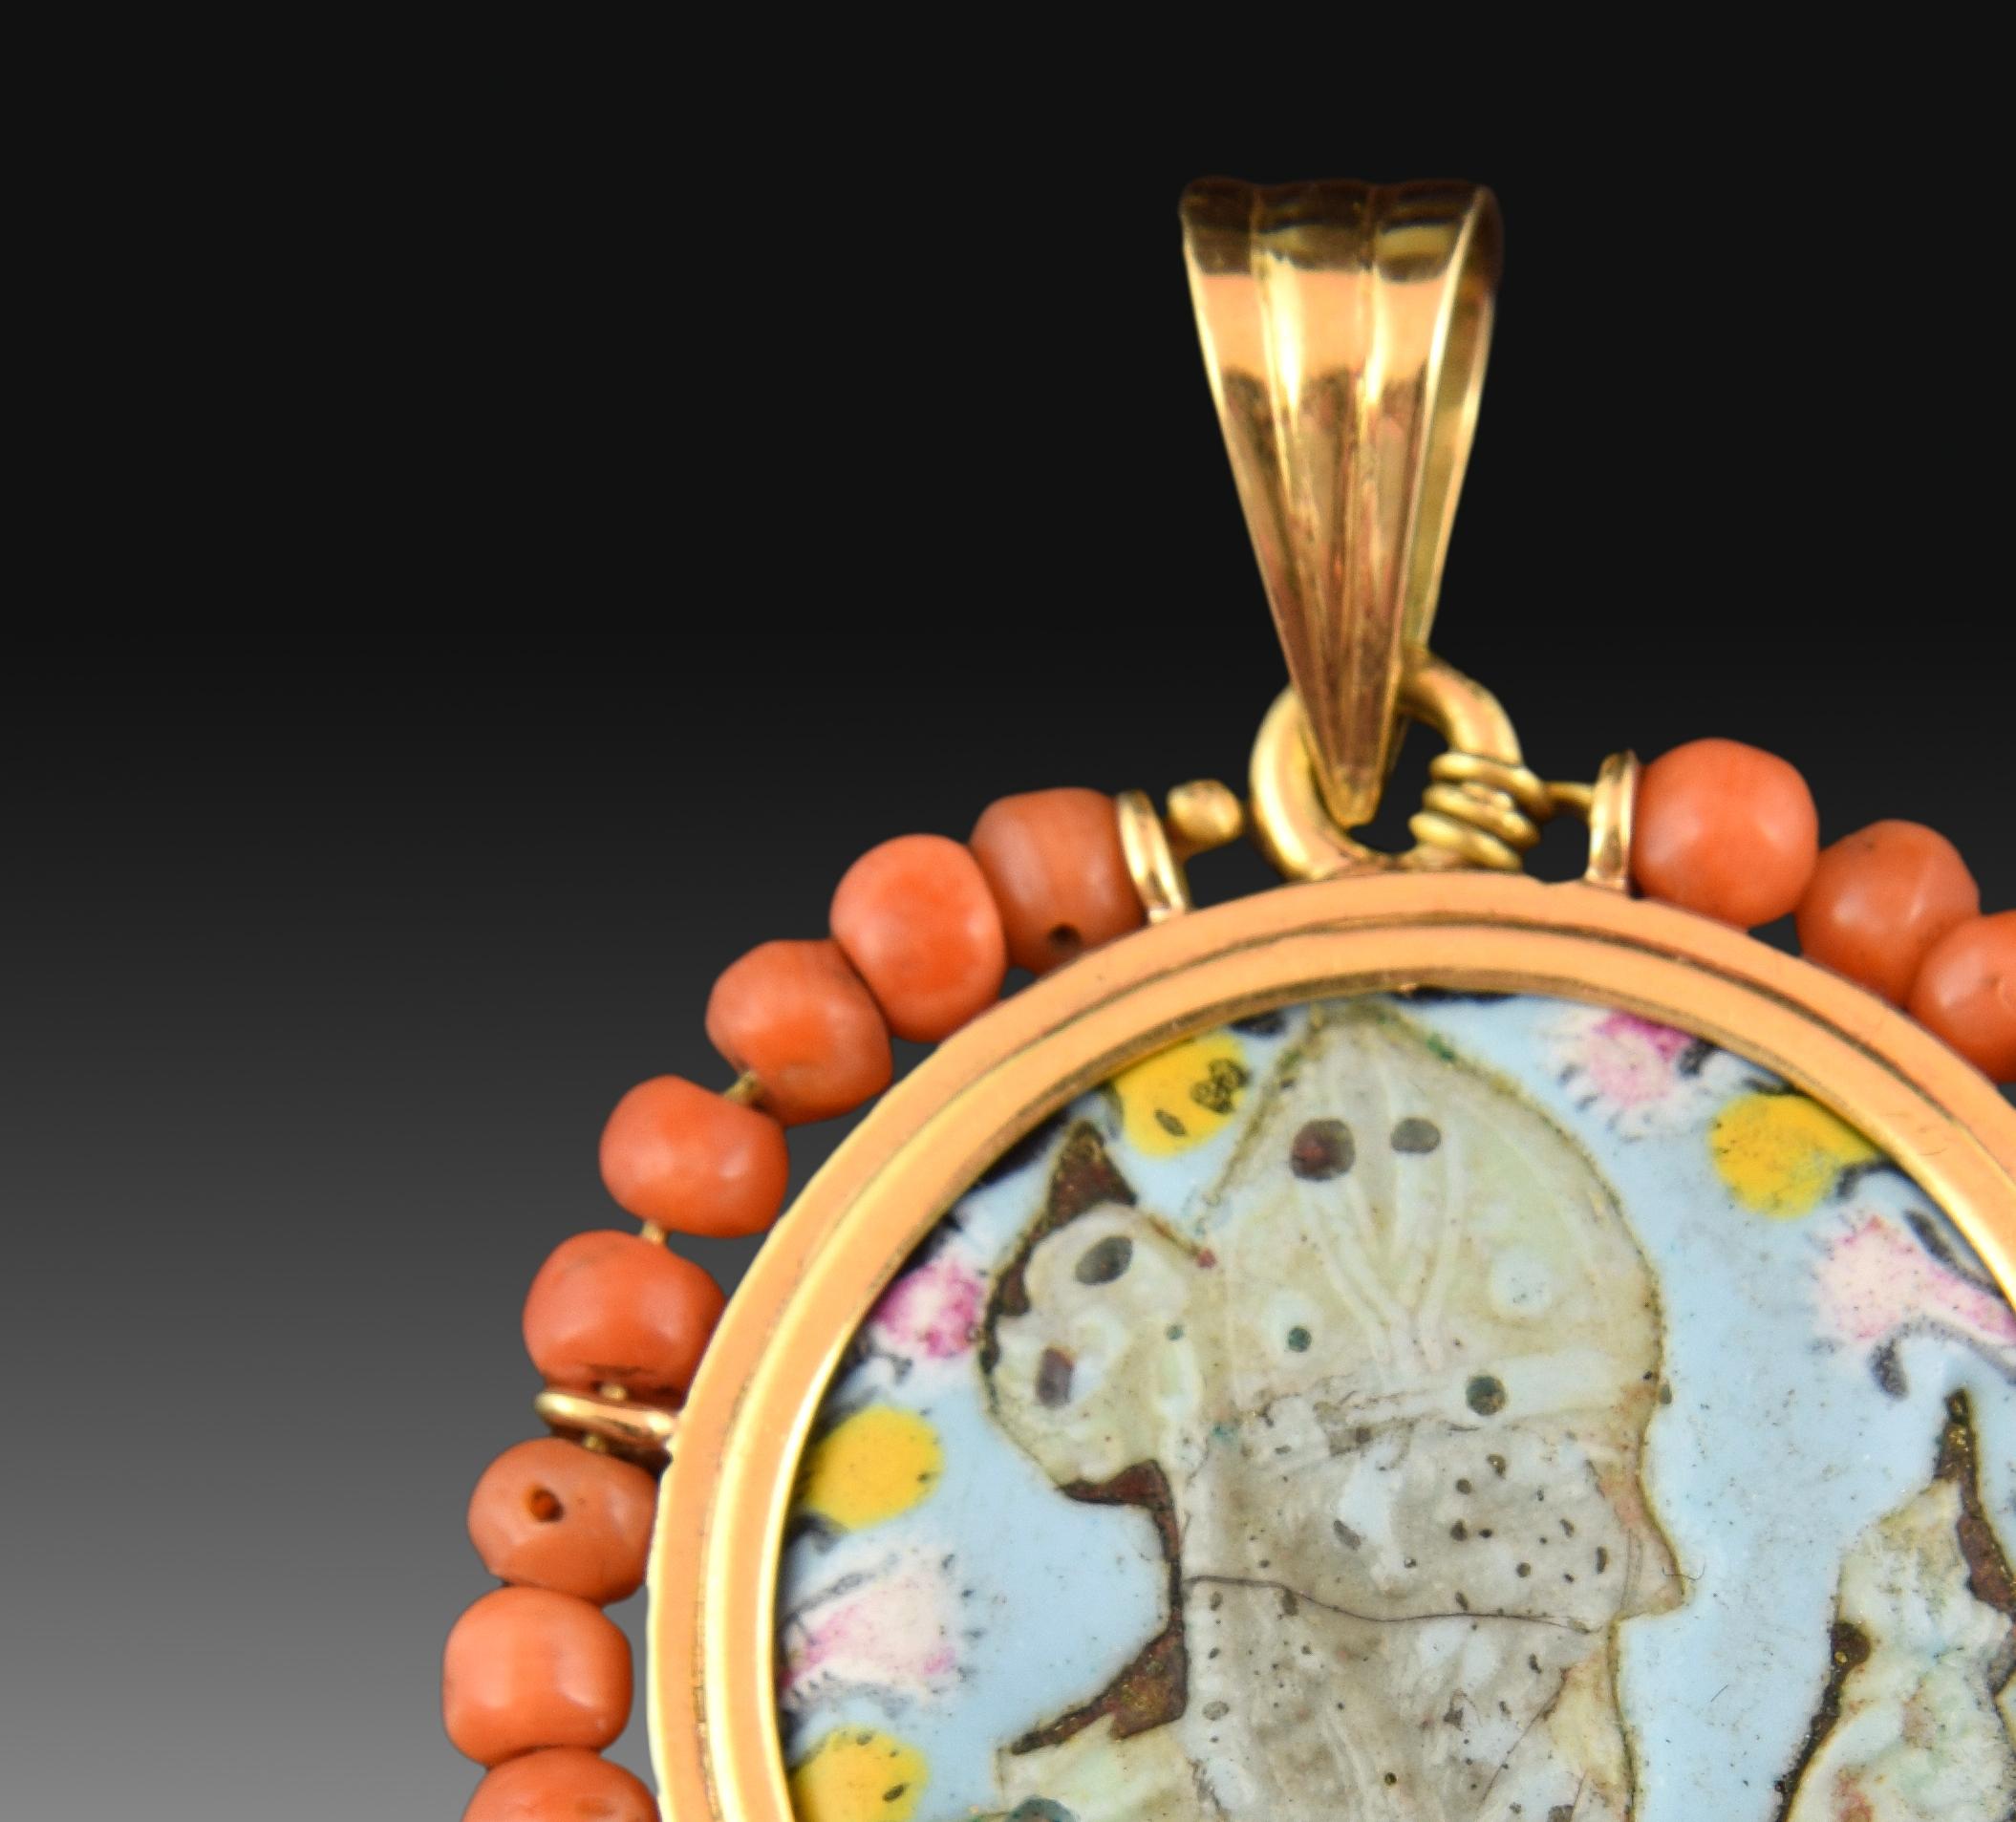 Neoclassical Devotional Pendant, Gold, Coral, Enamels, Possibly, 18th-19th Century